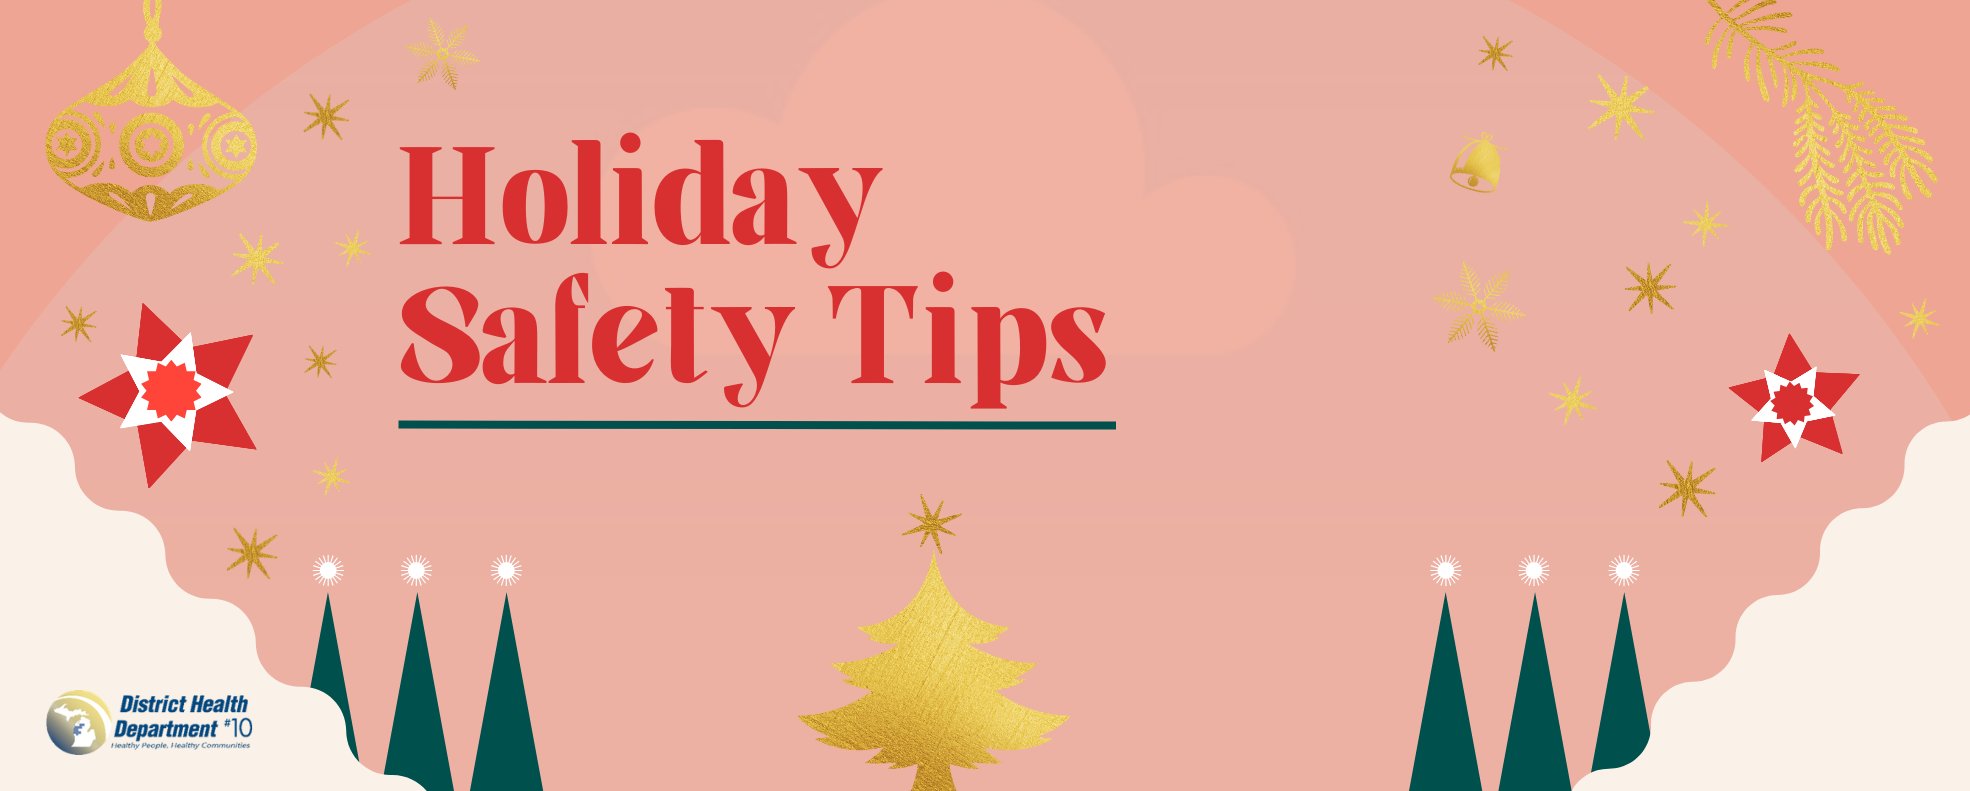 Holiday Safety Tips 